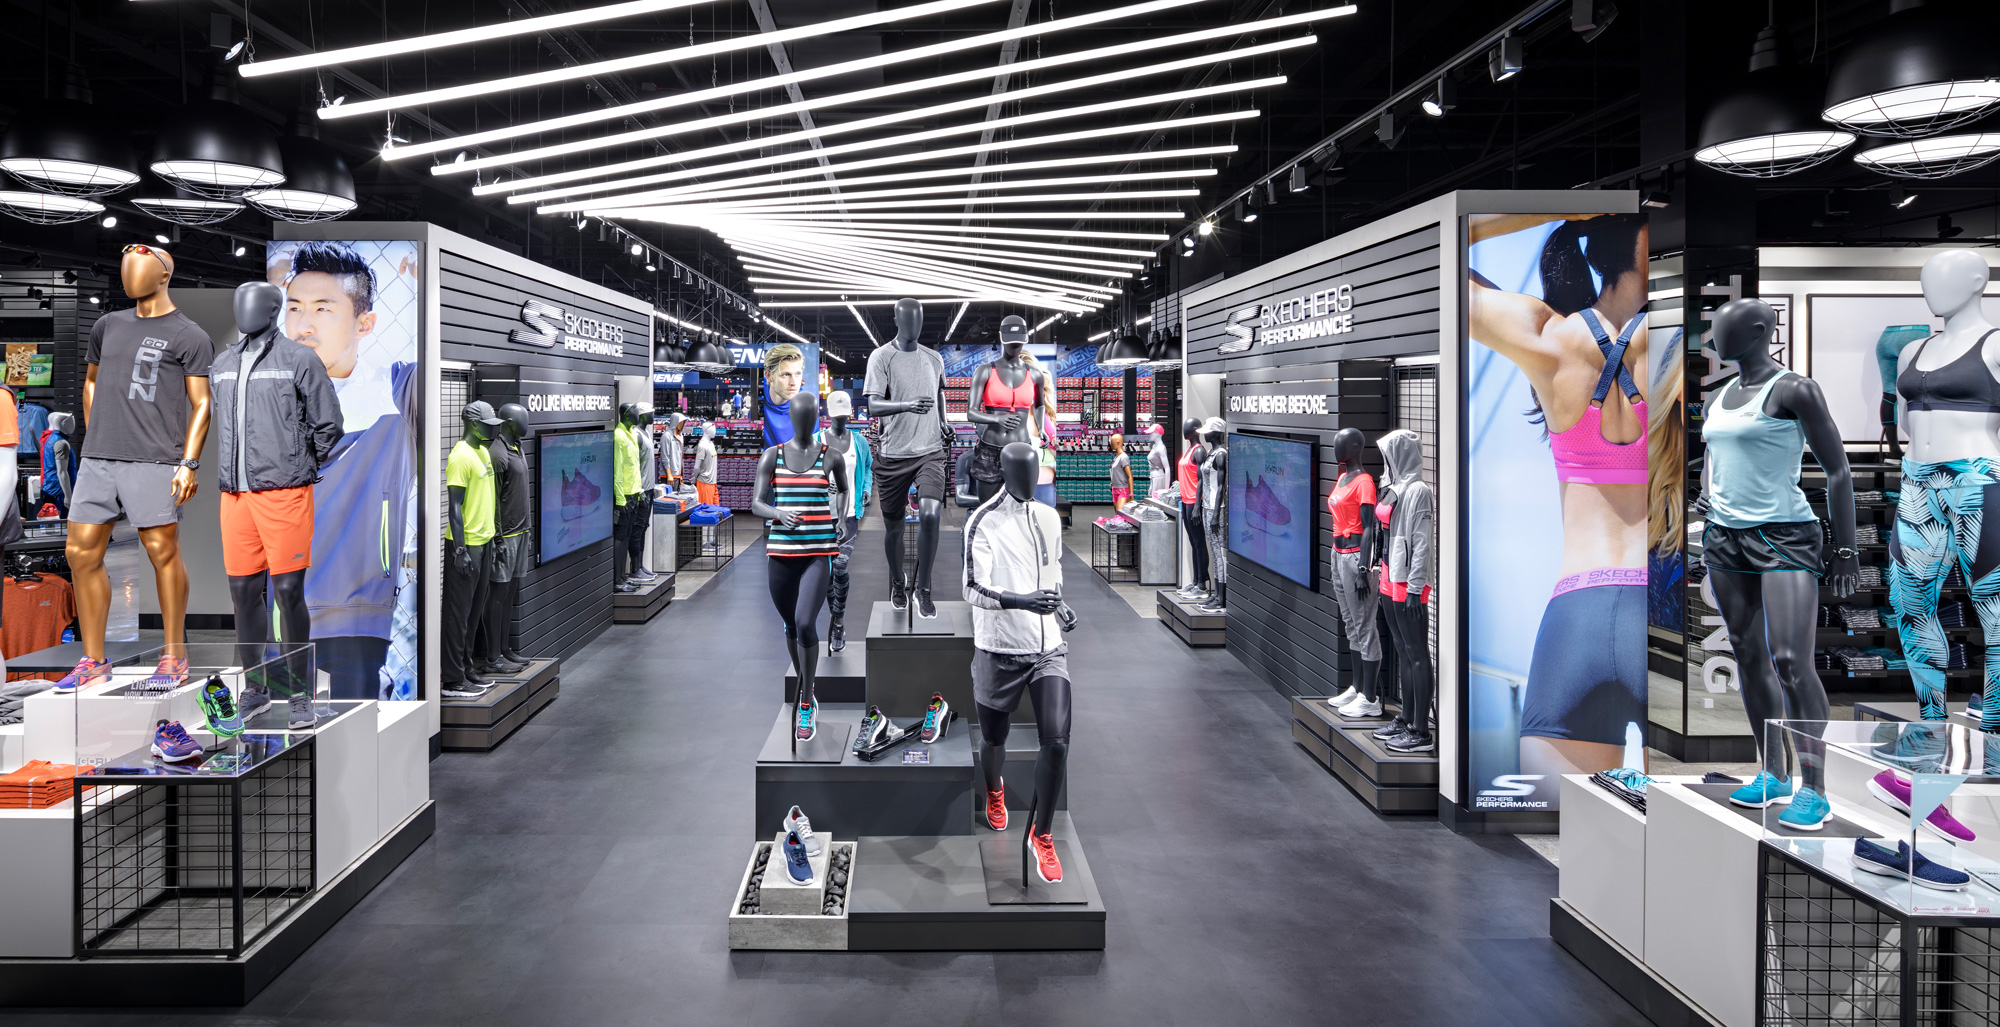 Skechers Achieves a Historical High of $7.4 Billion in 2022, With a 12% Growth in Offline Sales During Chinese New Year